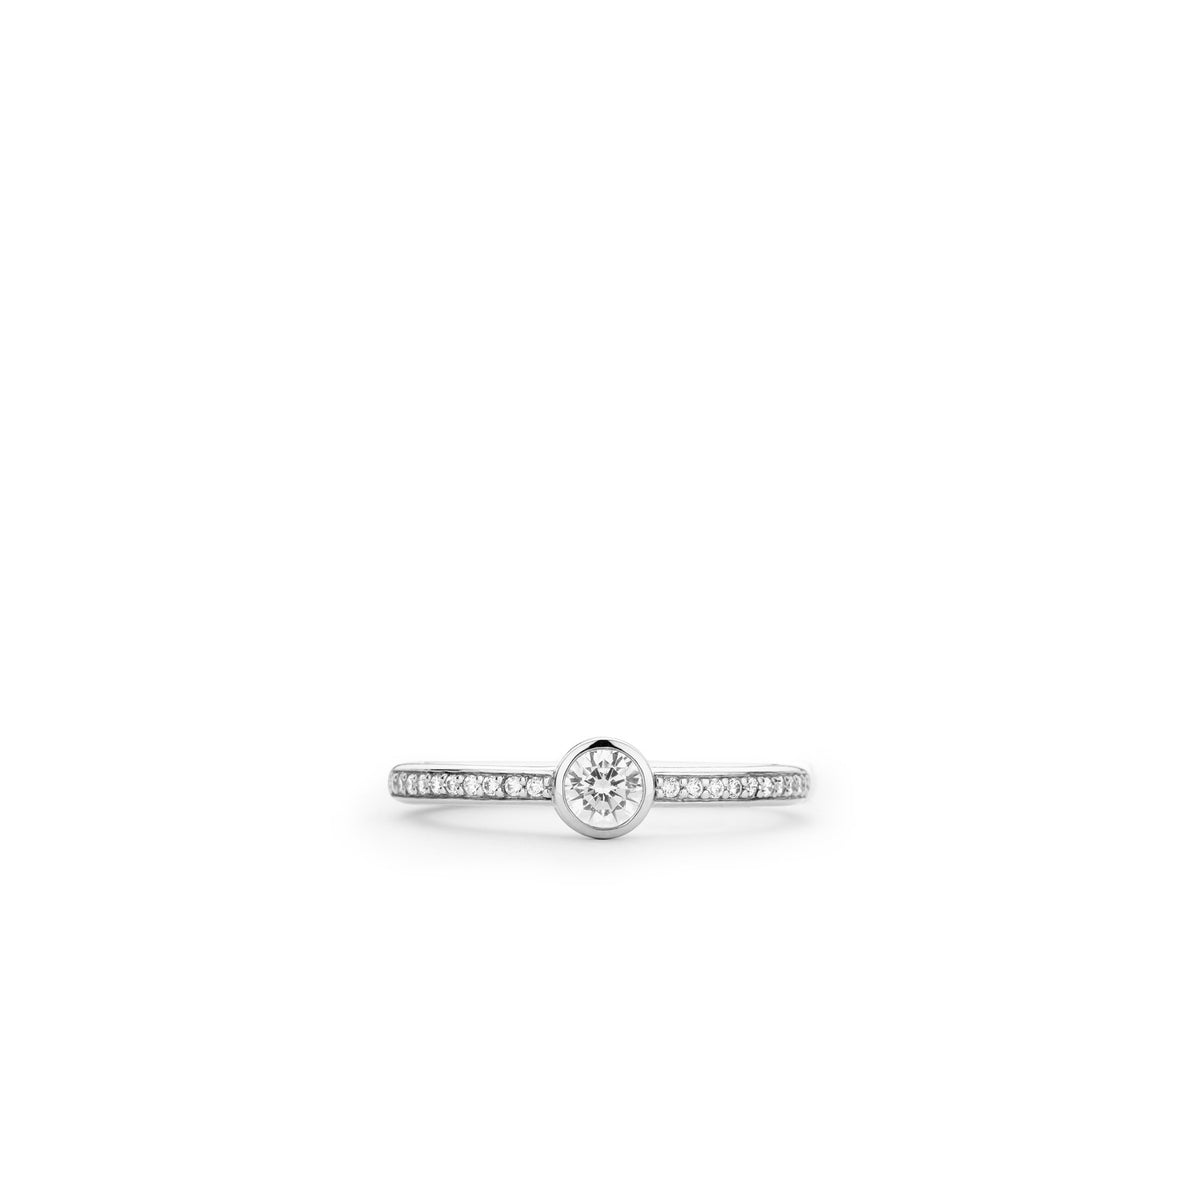 TI SENTO Sterling Silver Half Eternity Ring with Bezel Set Center Cubic Zirconia